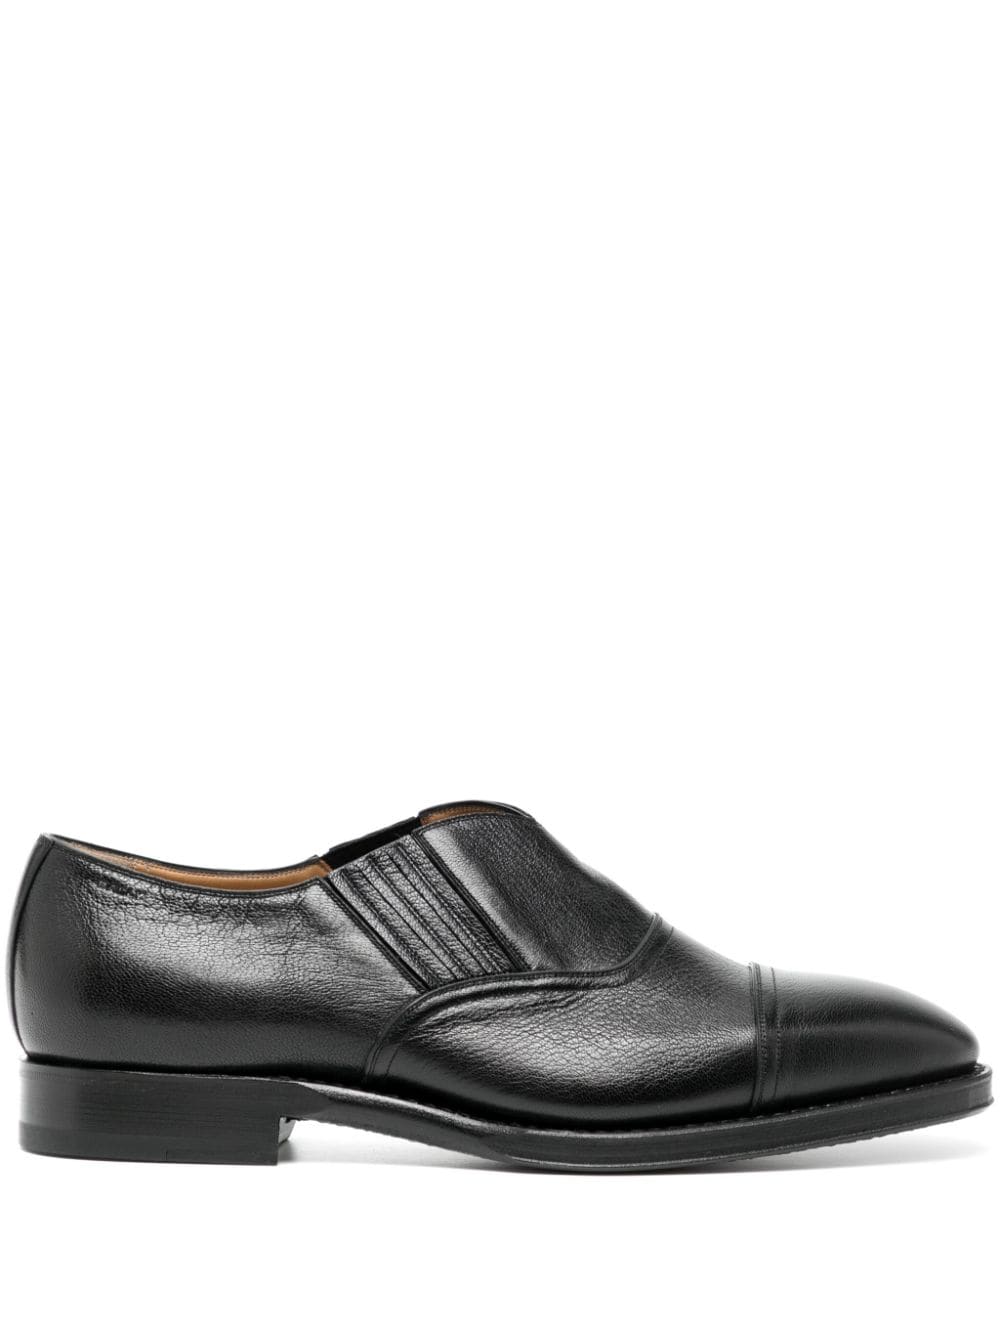 Bally elasticated-panels leather loafers - Black von Bally